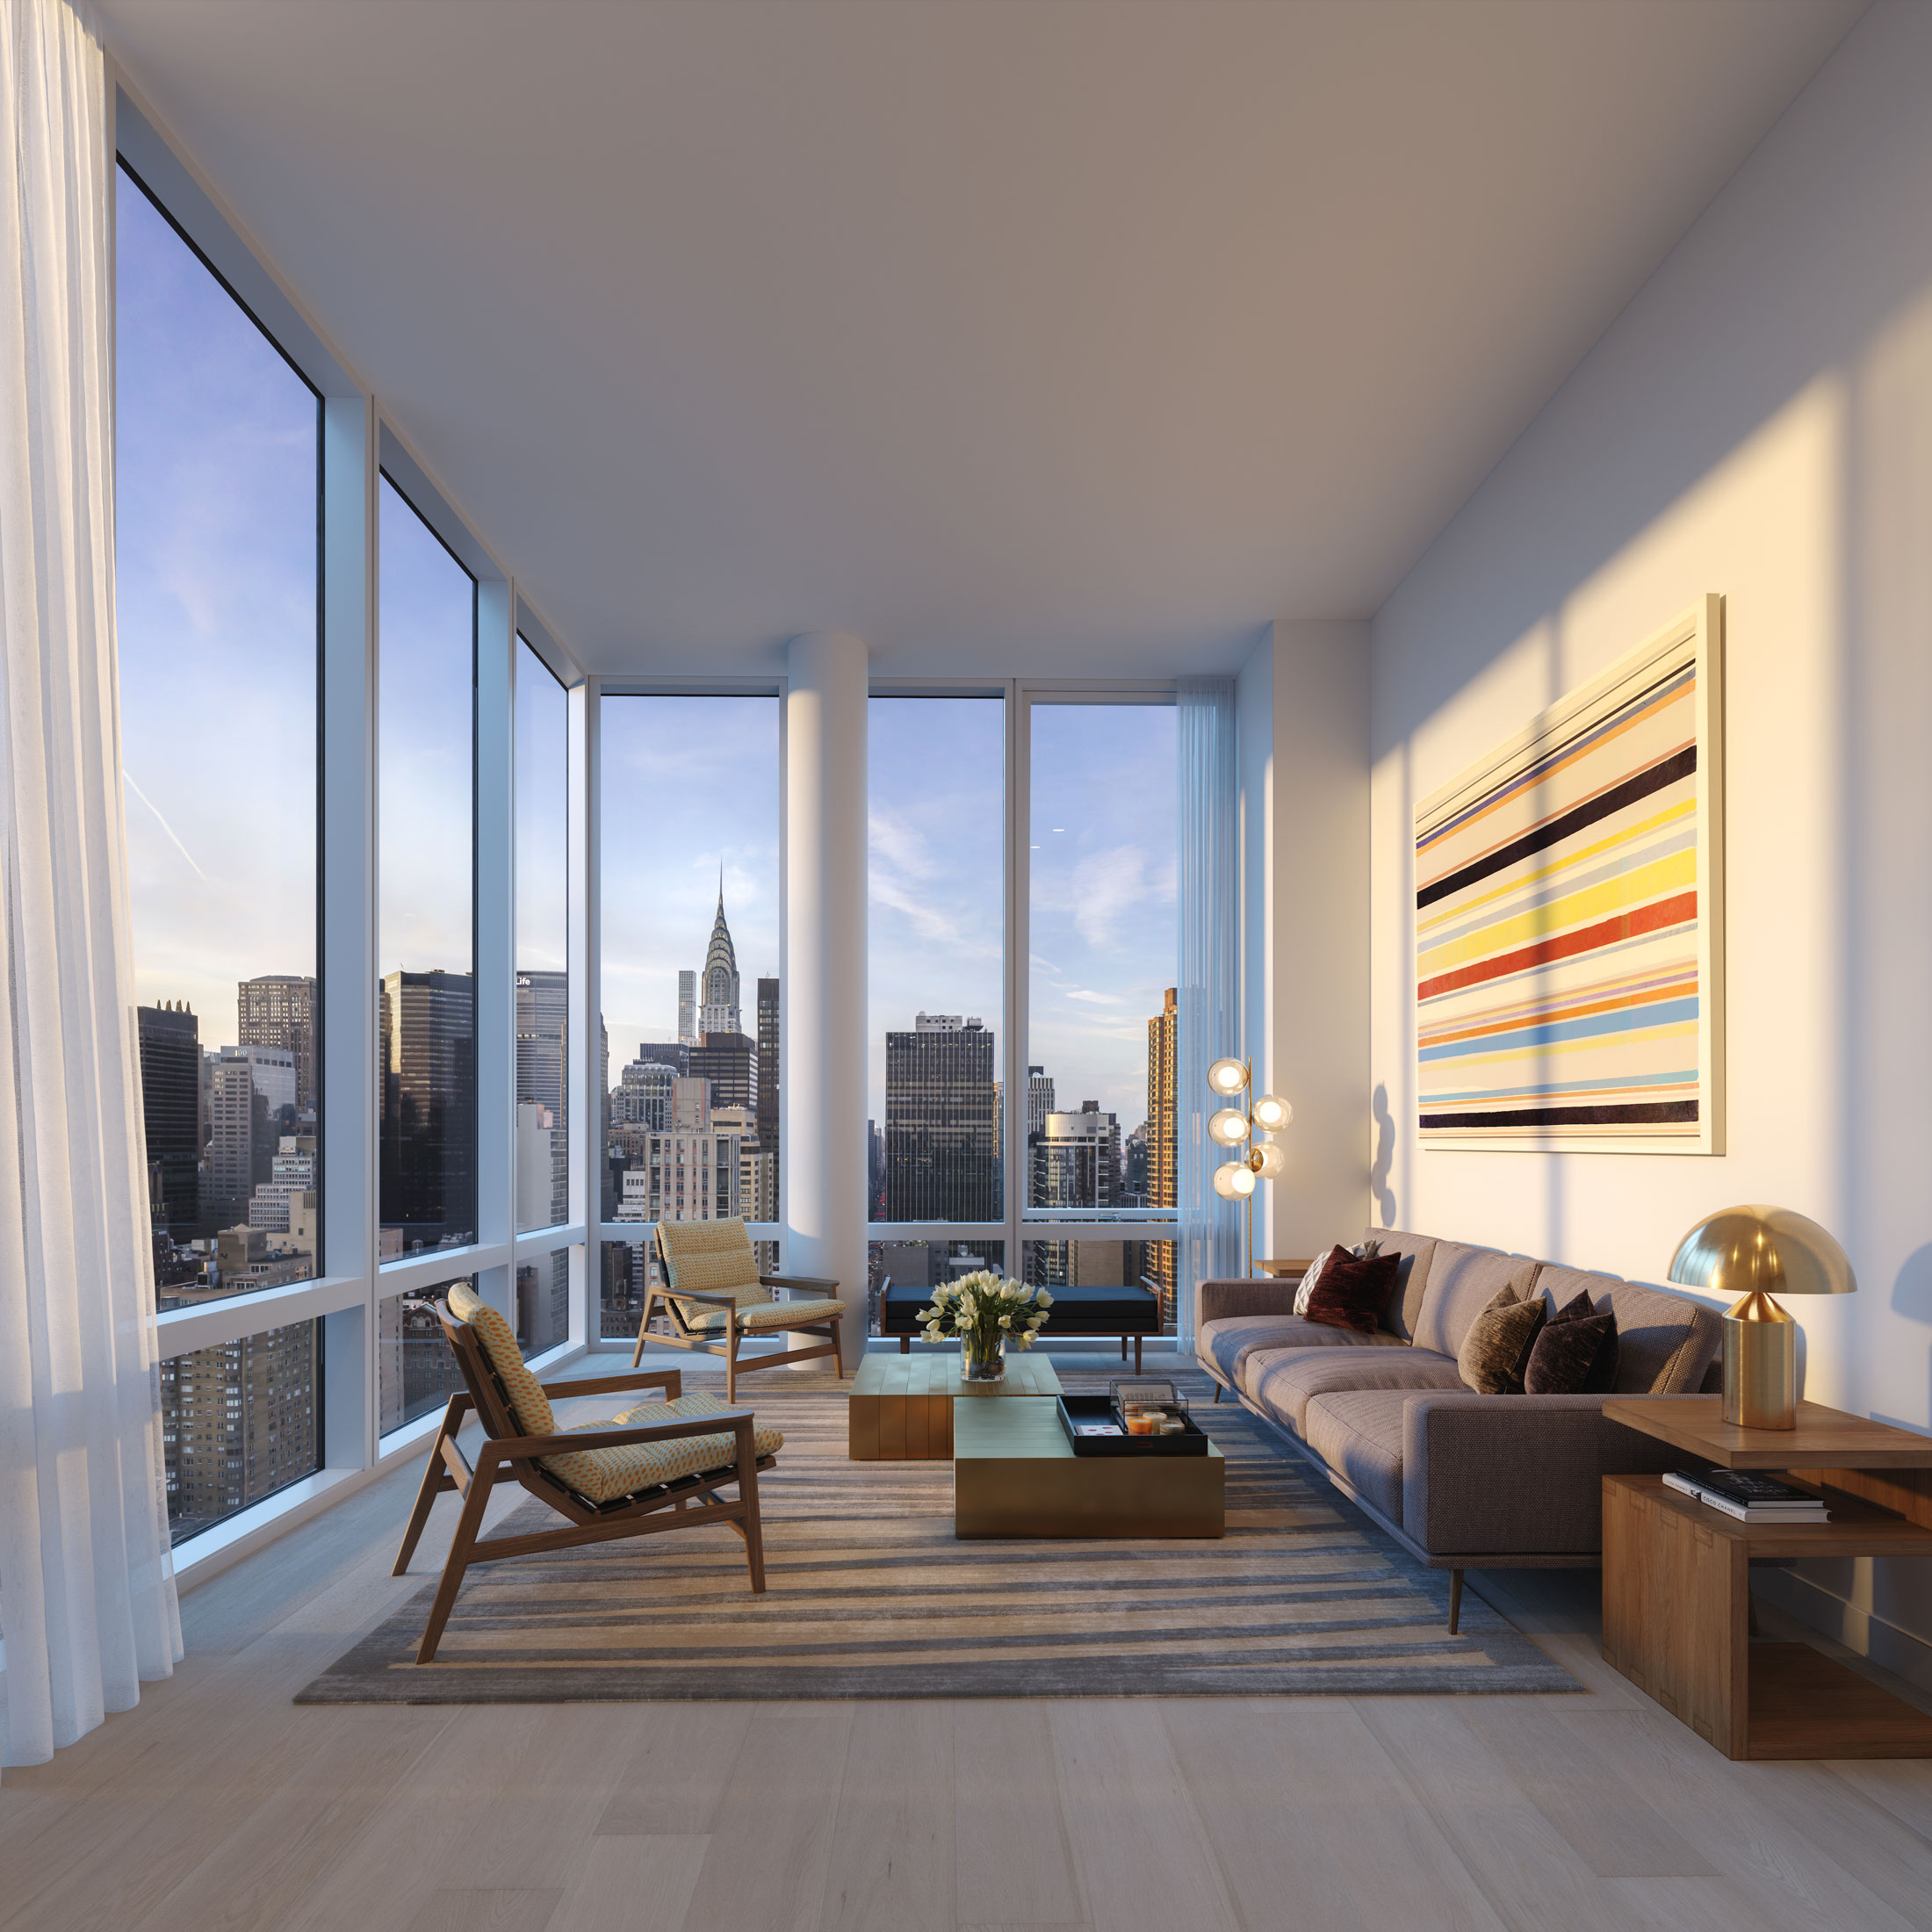 Architectural Rendering of the living room of the Eastlight building project located on the Kips Bay neighborhood in New York City